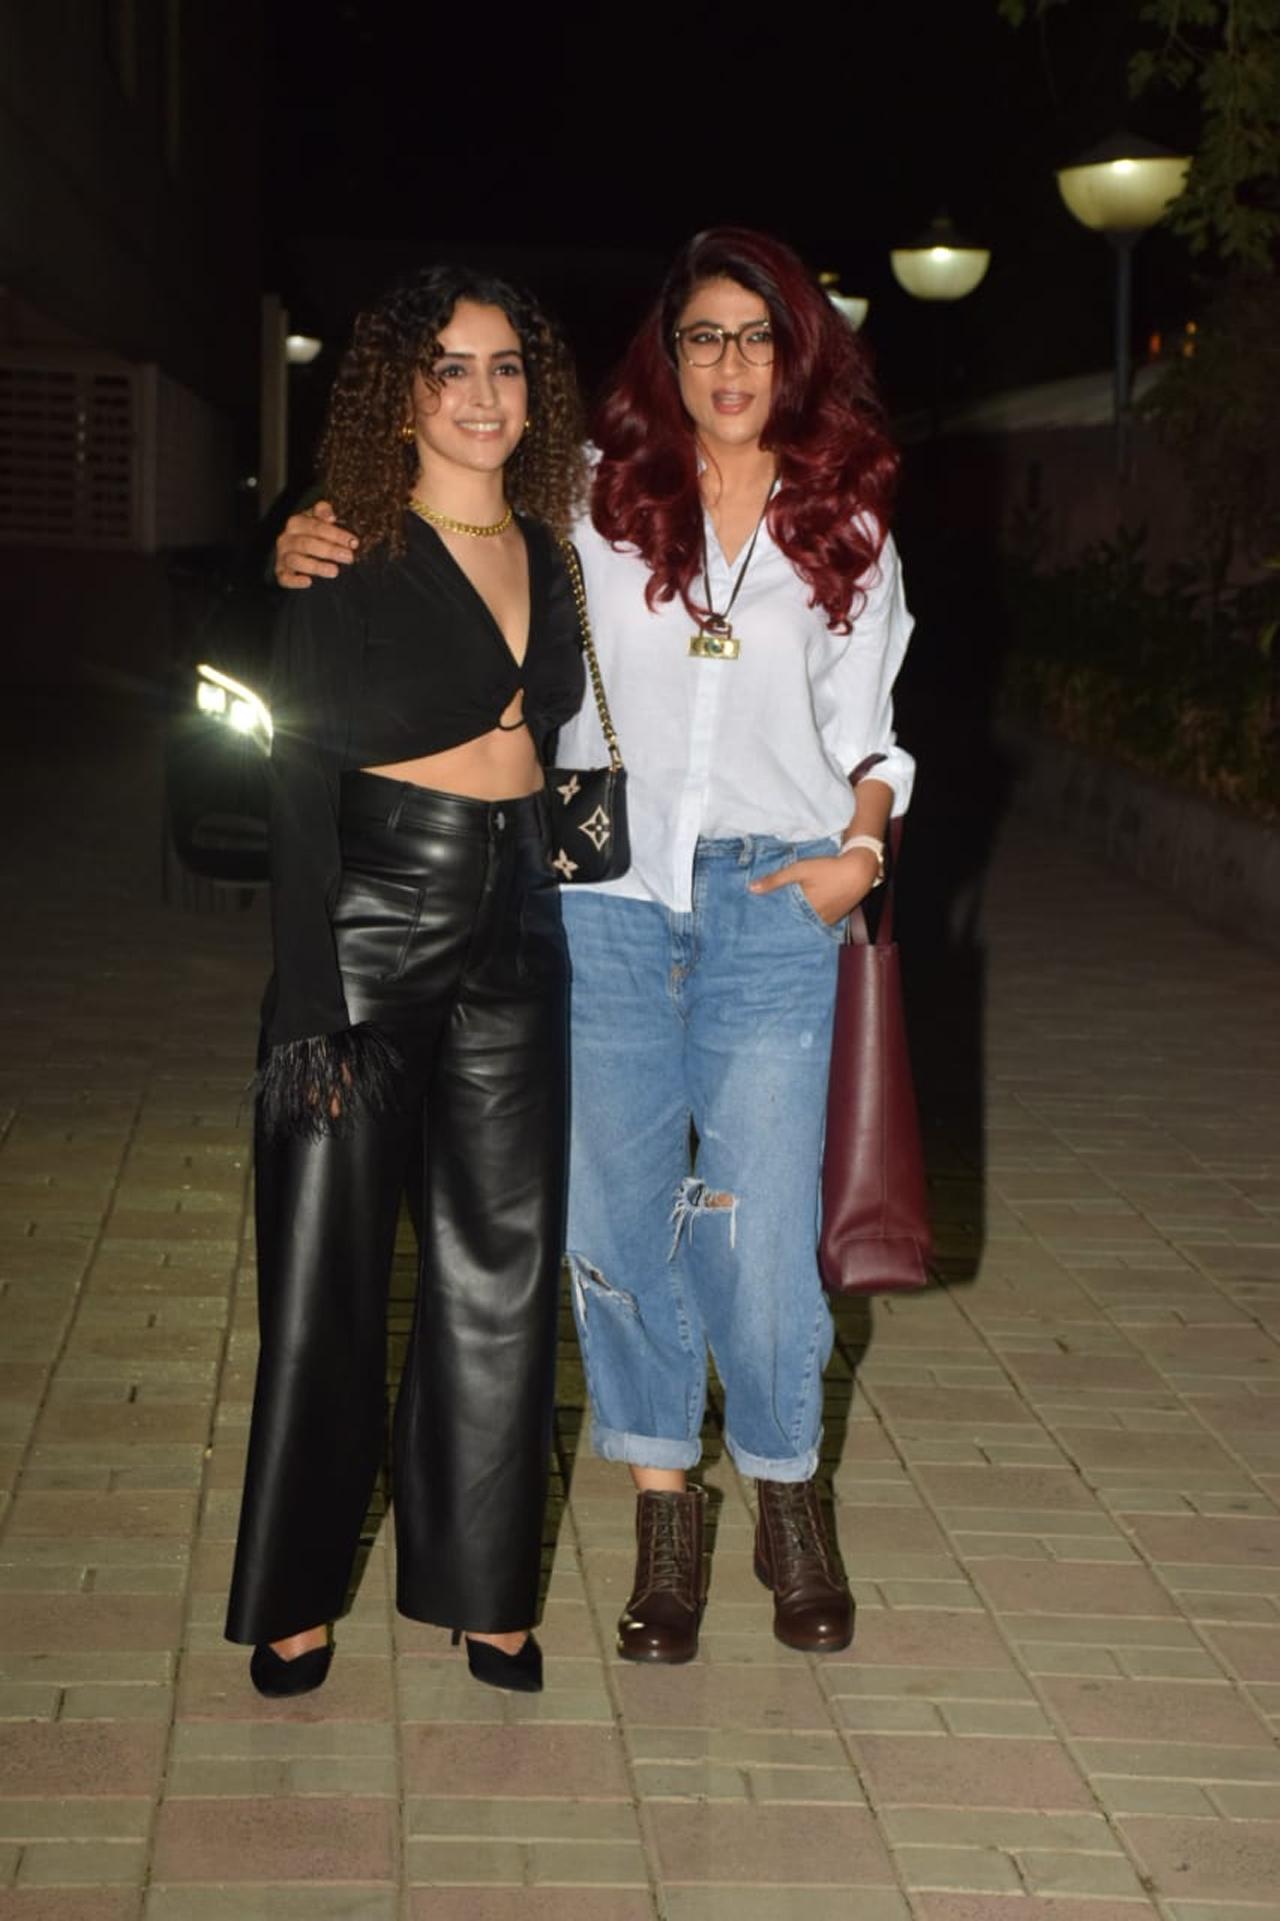 Sanya Malhotra too sported black leather pants, paired with a pretty top as she attended the show with her friend Tahira Kashyap.